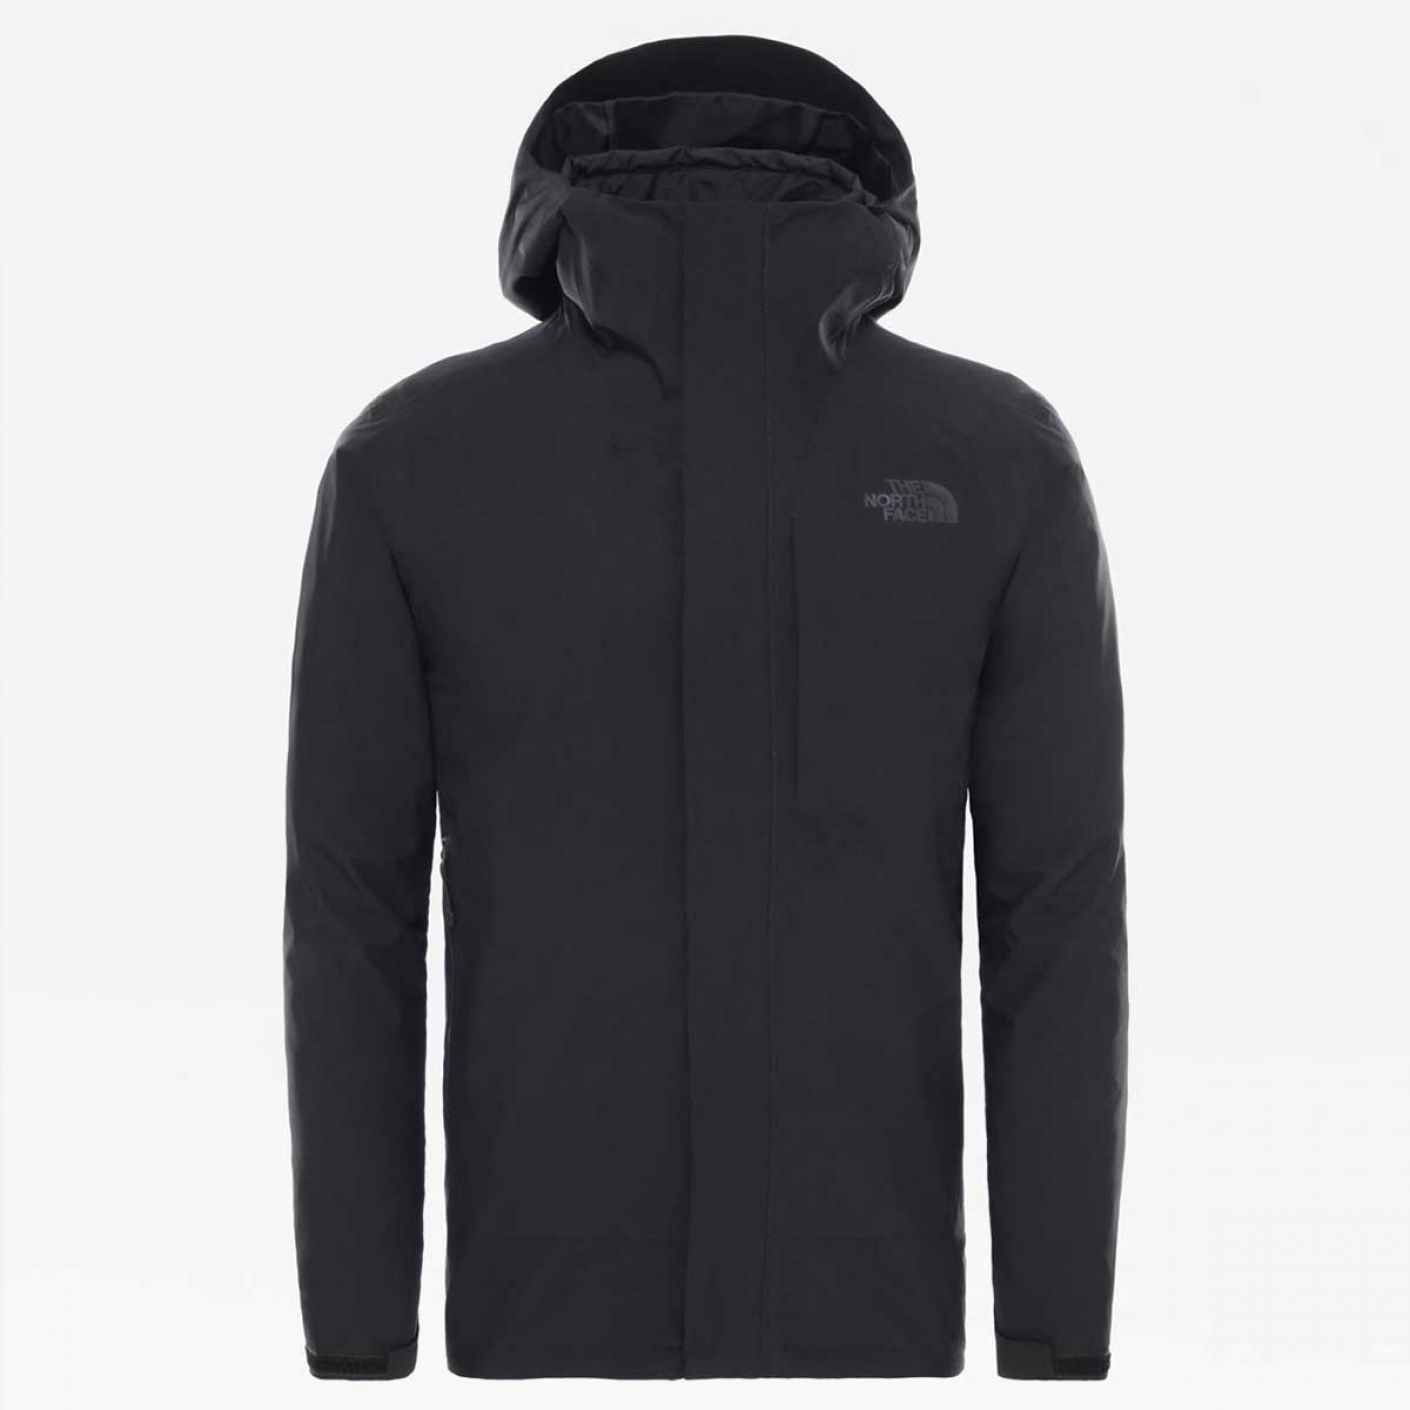 The North Face Giacca Uomo Cargo Triclimate Nera